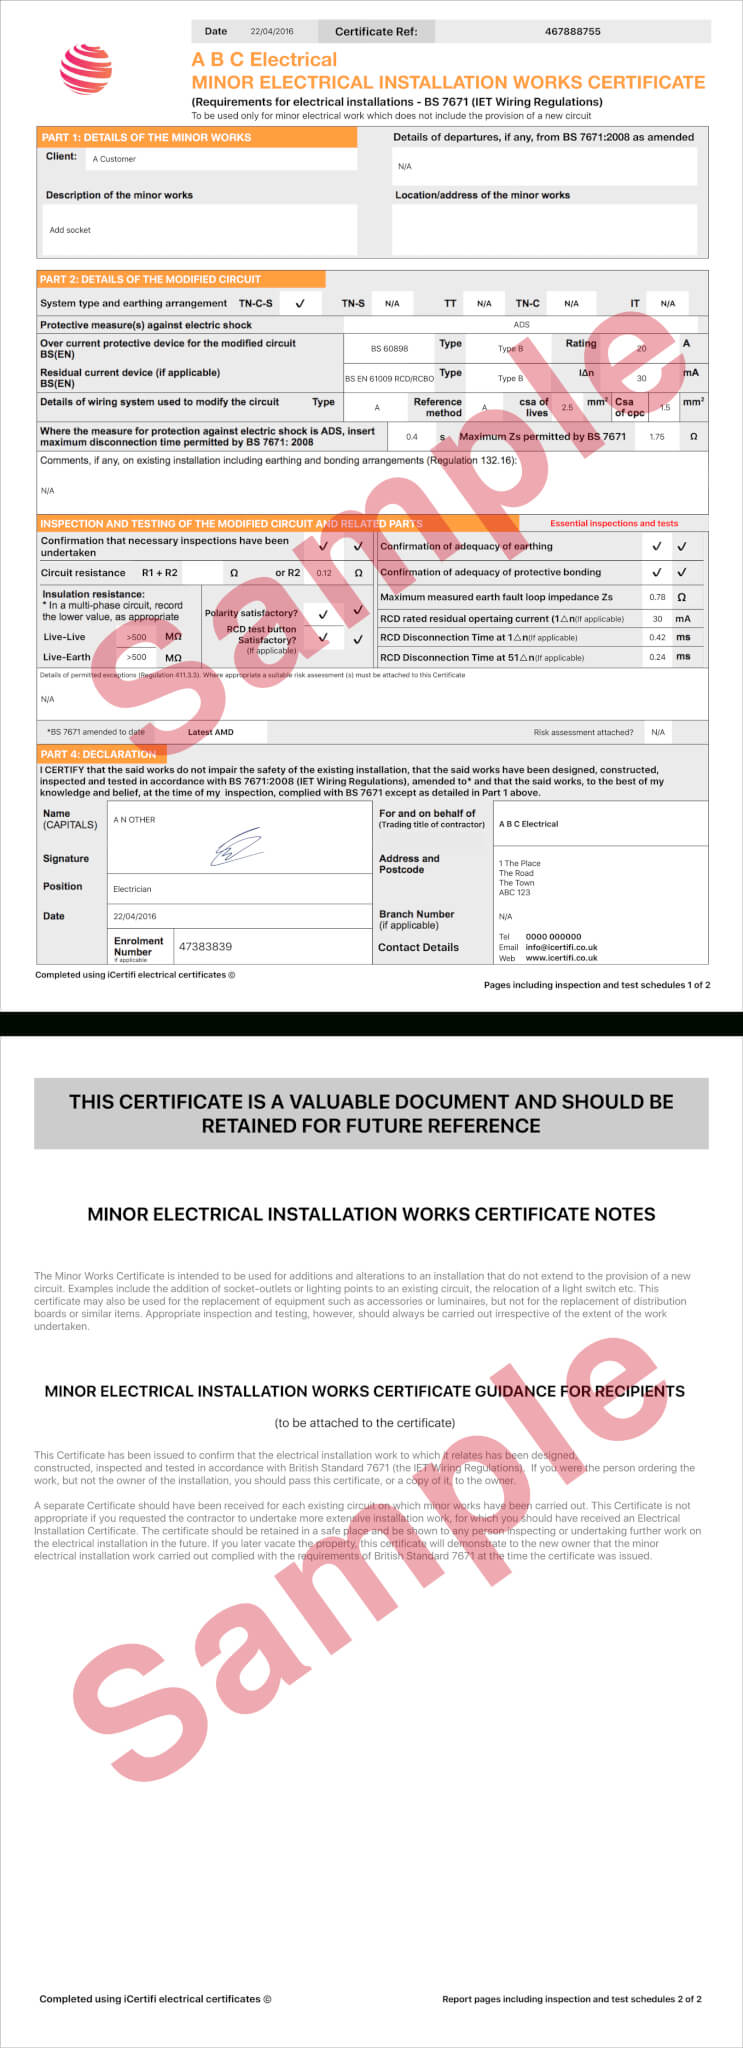 Electrical Certificate - Example Minor Works Certificate Throughout Electrical Minor Works Certificate Template